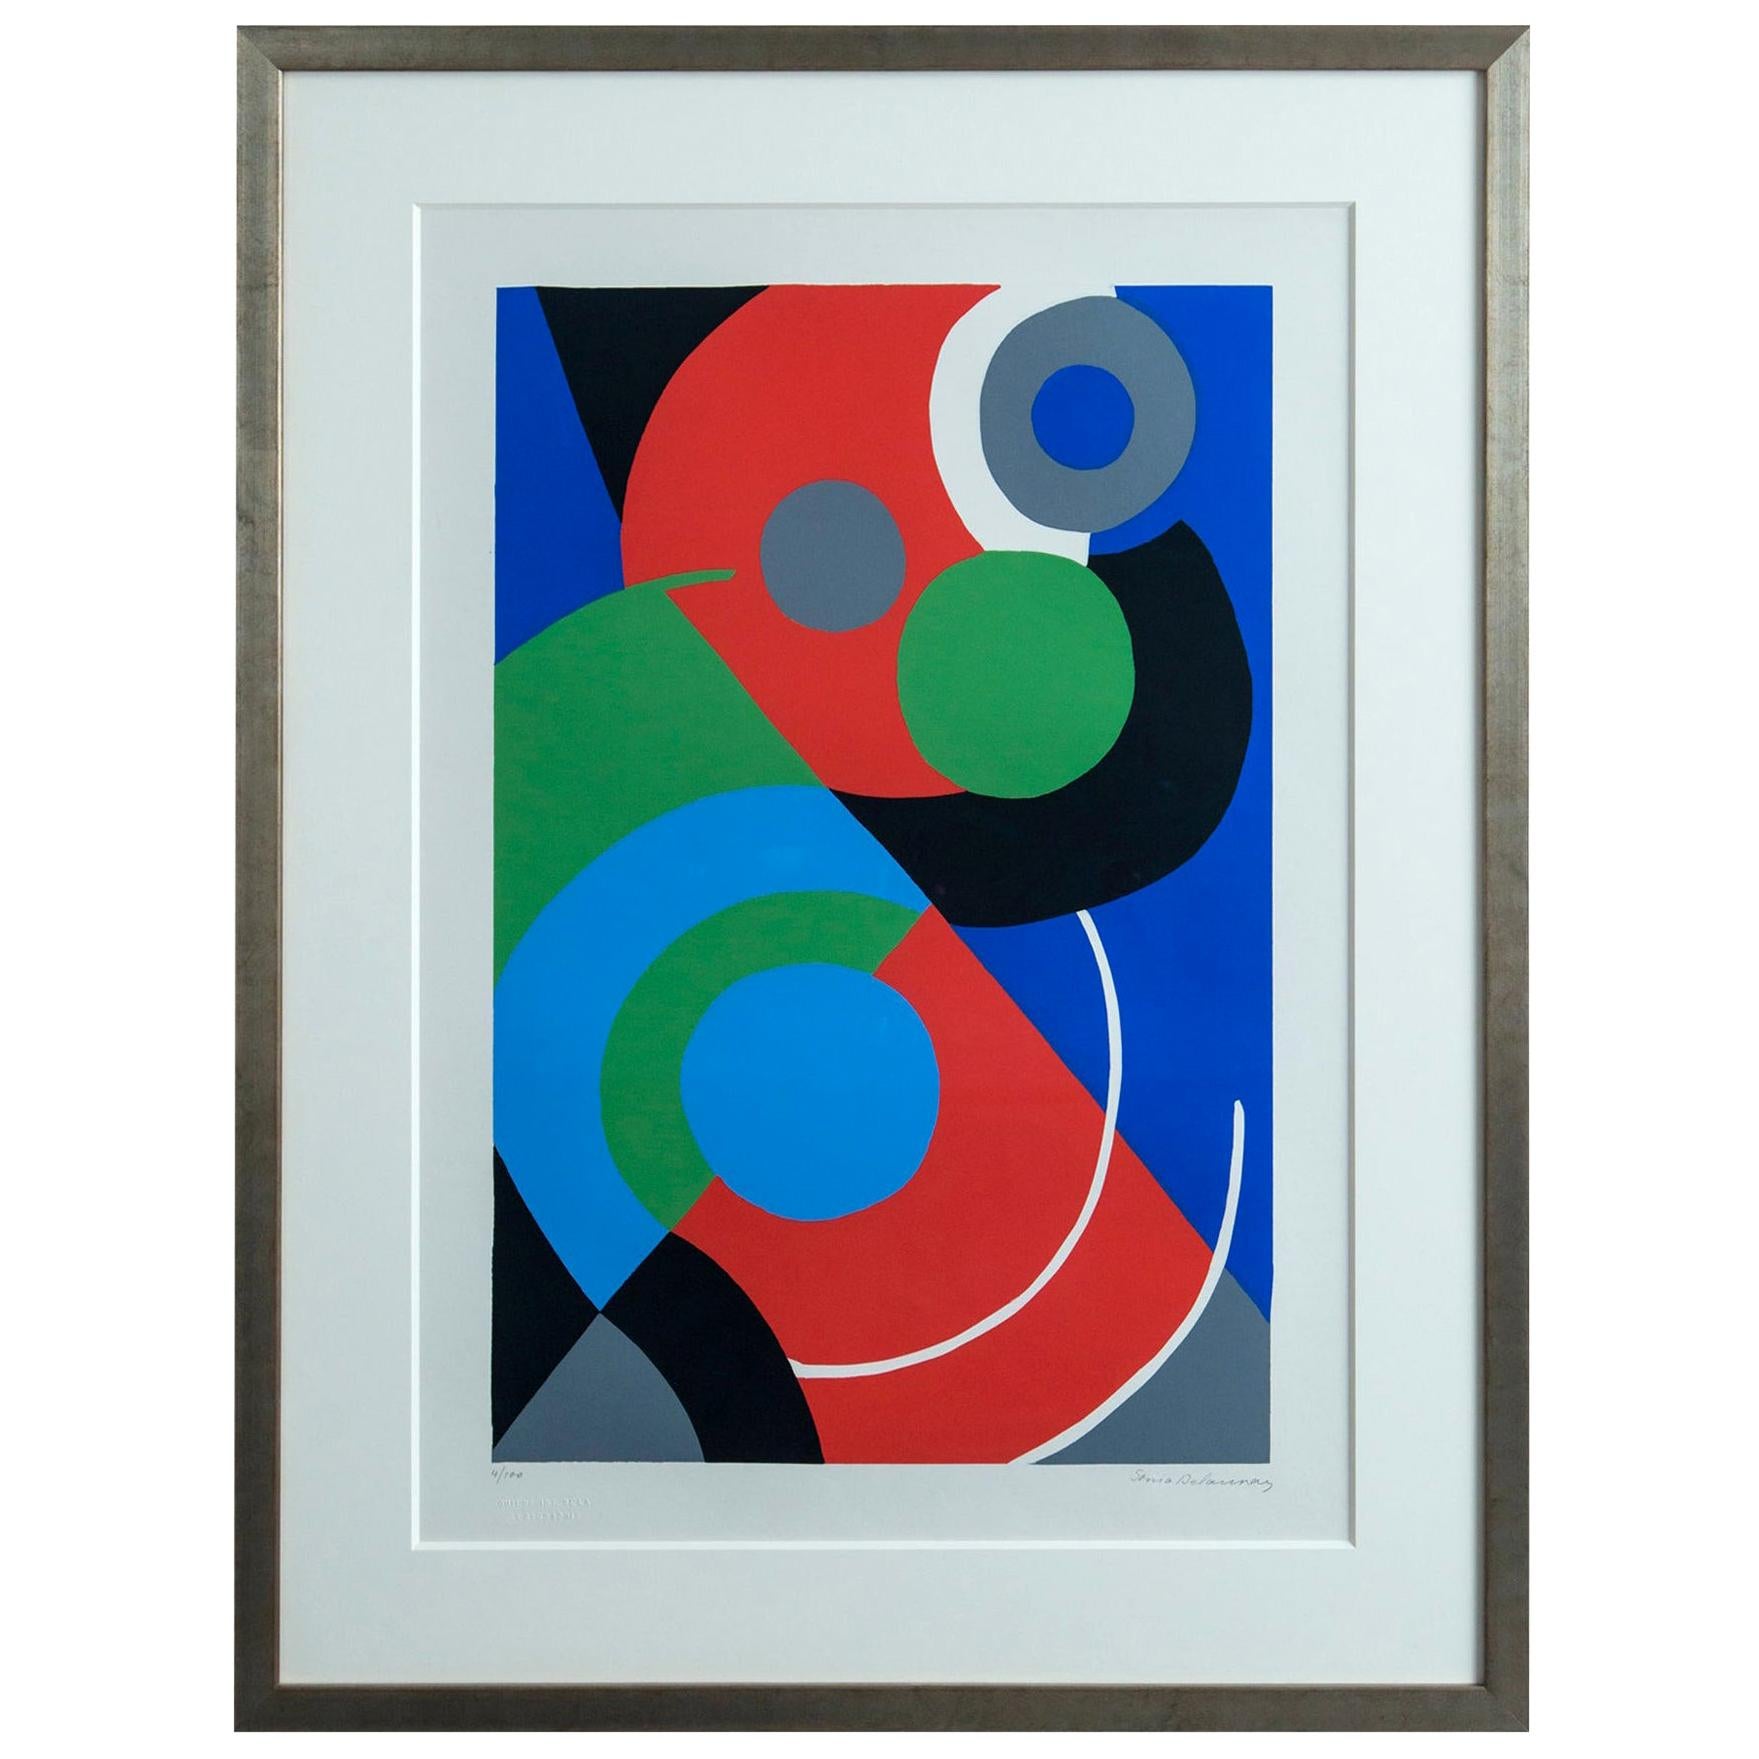 Sonia Delaunay Geometric Editioned Signed Lithograph